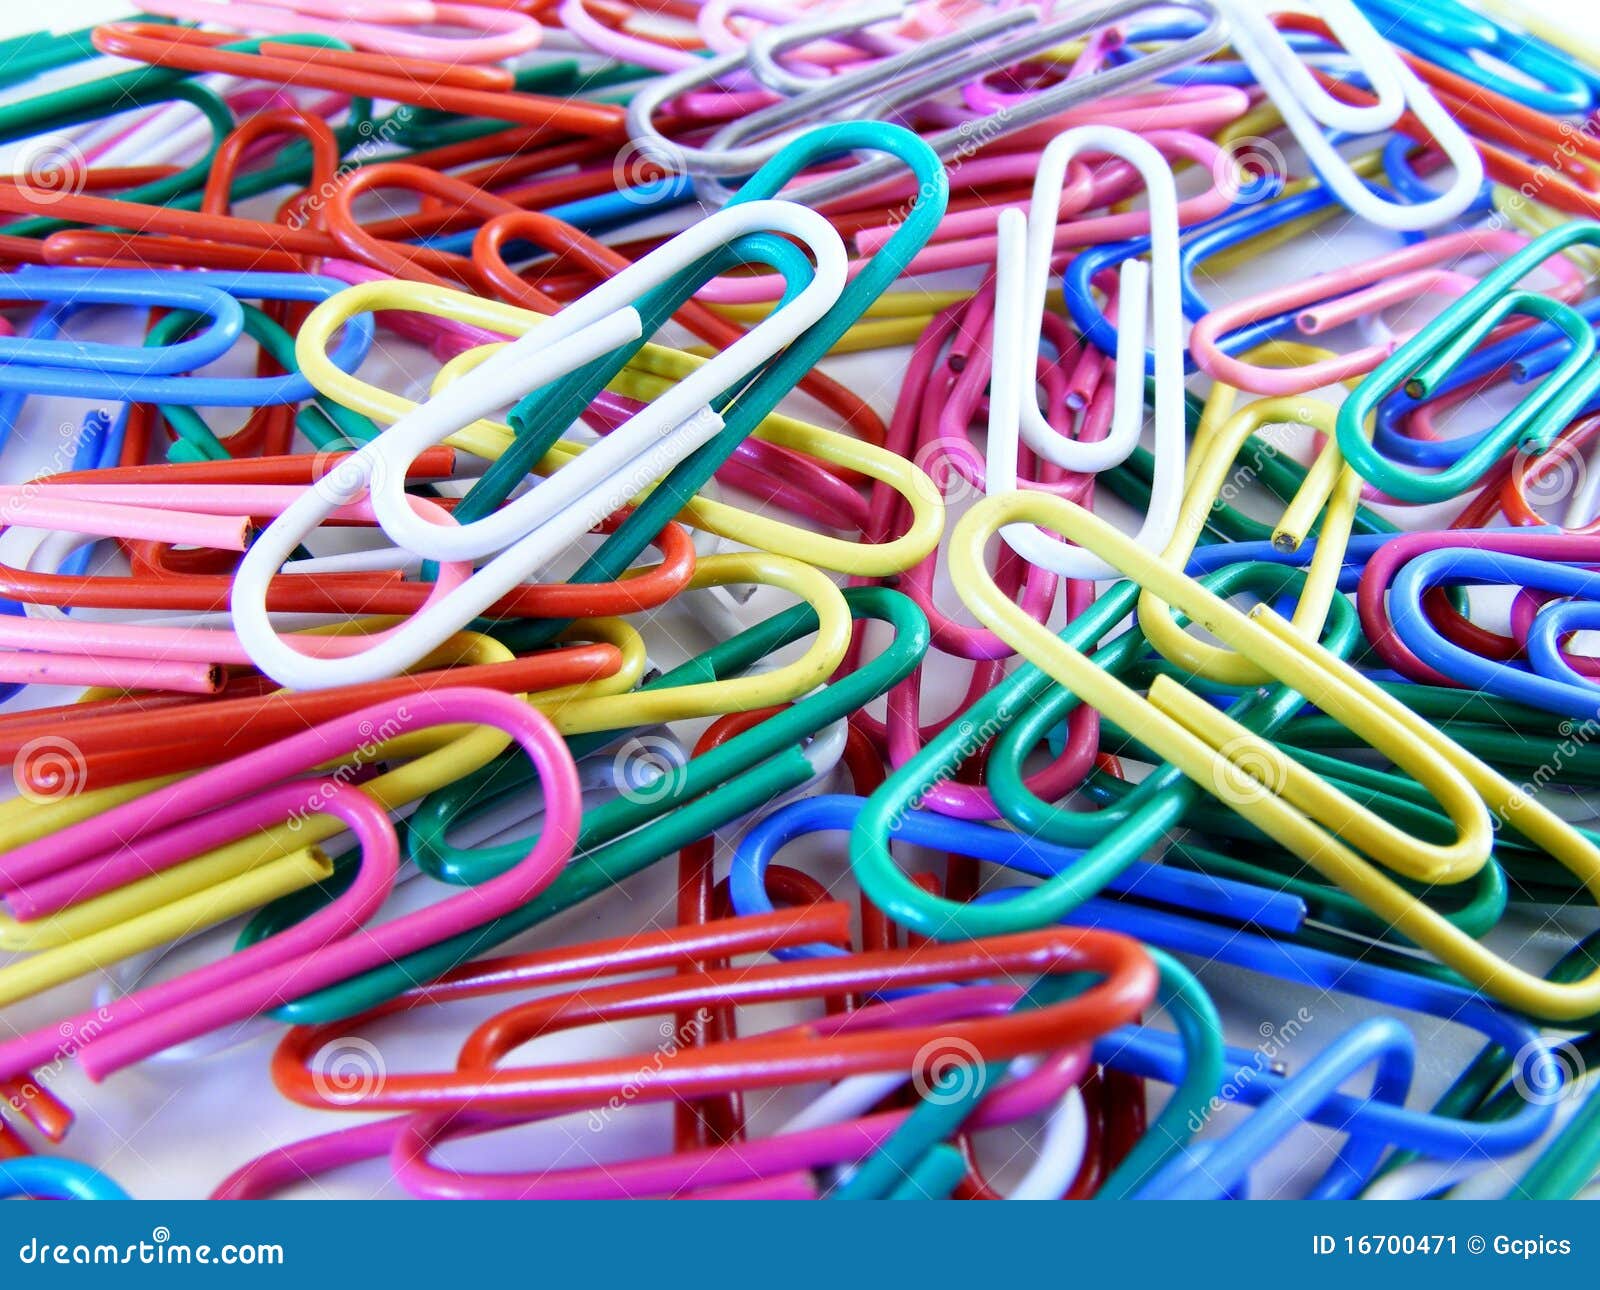 colour paper clips in a pile